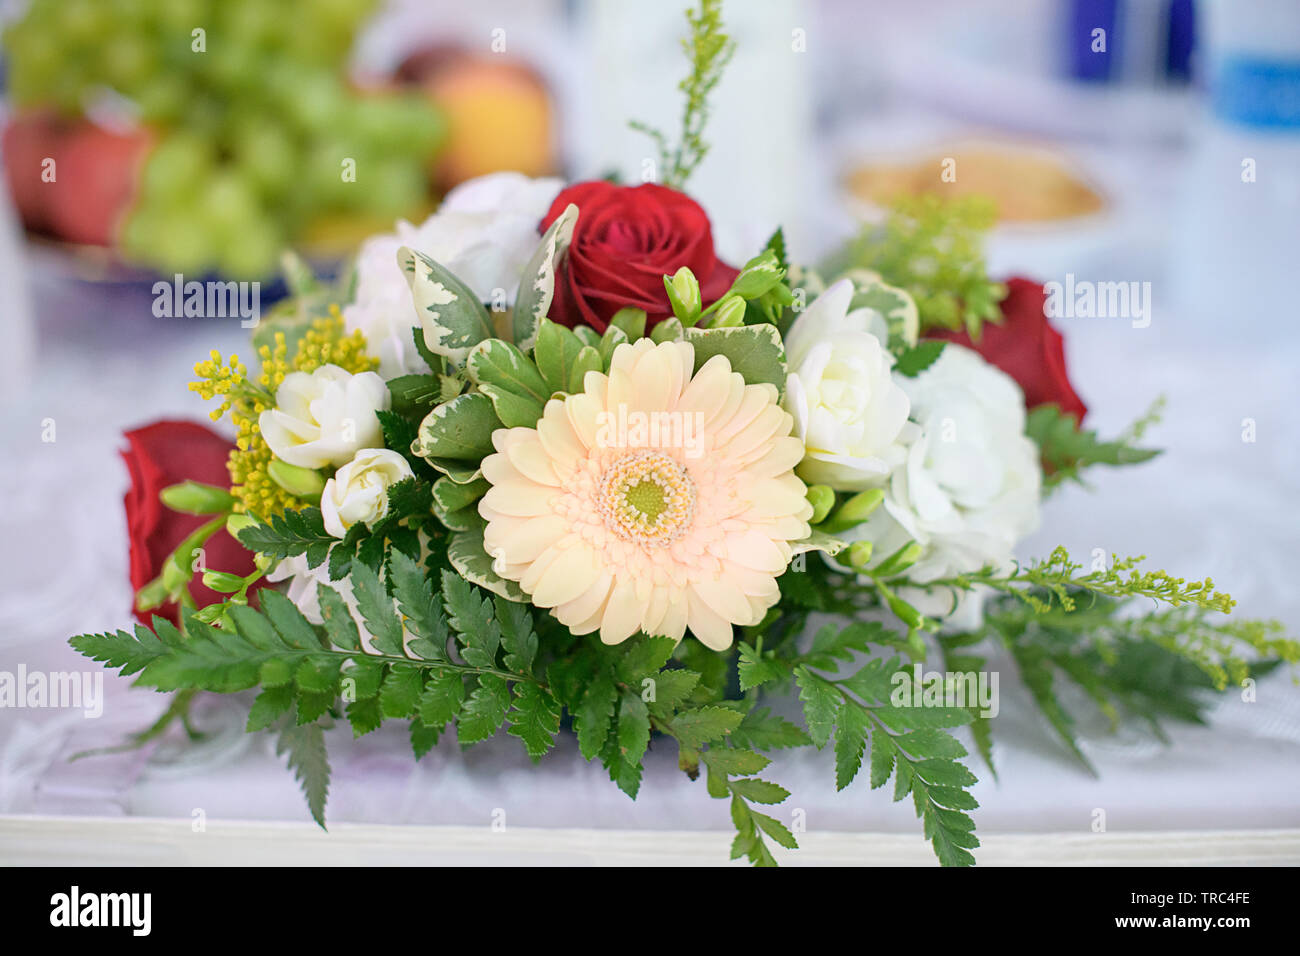 Romantic wedding decor for bride and groom or guests dinner tables at the reception venue or restaurant with beautiful floral centerpieces Stock Photo